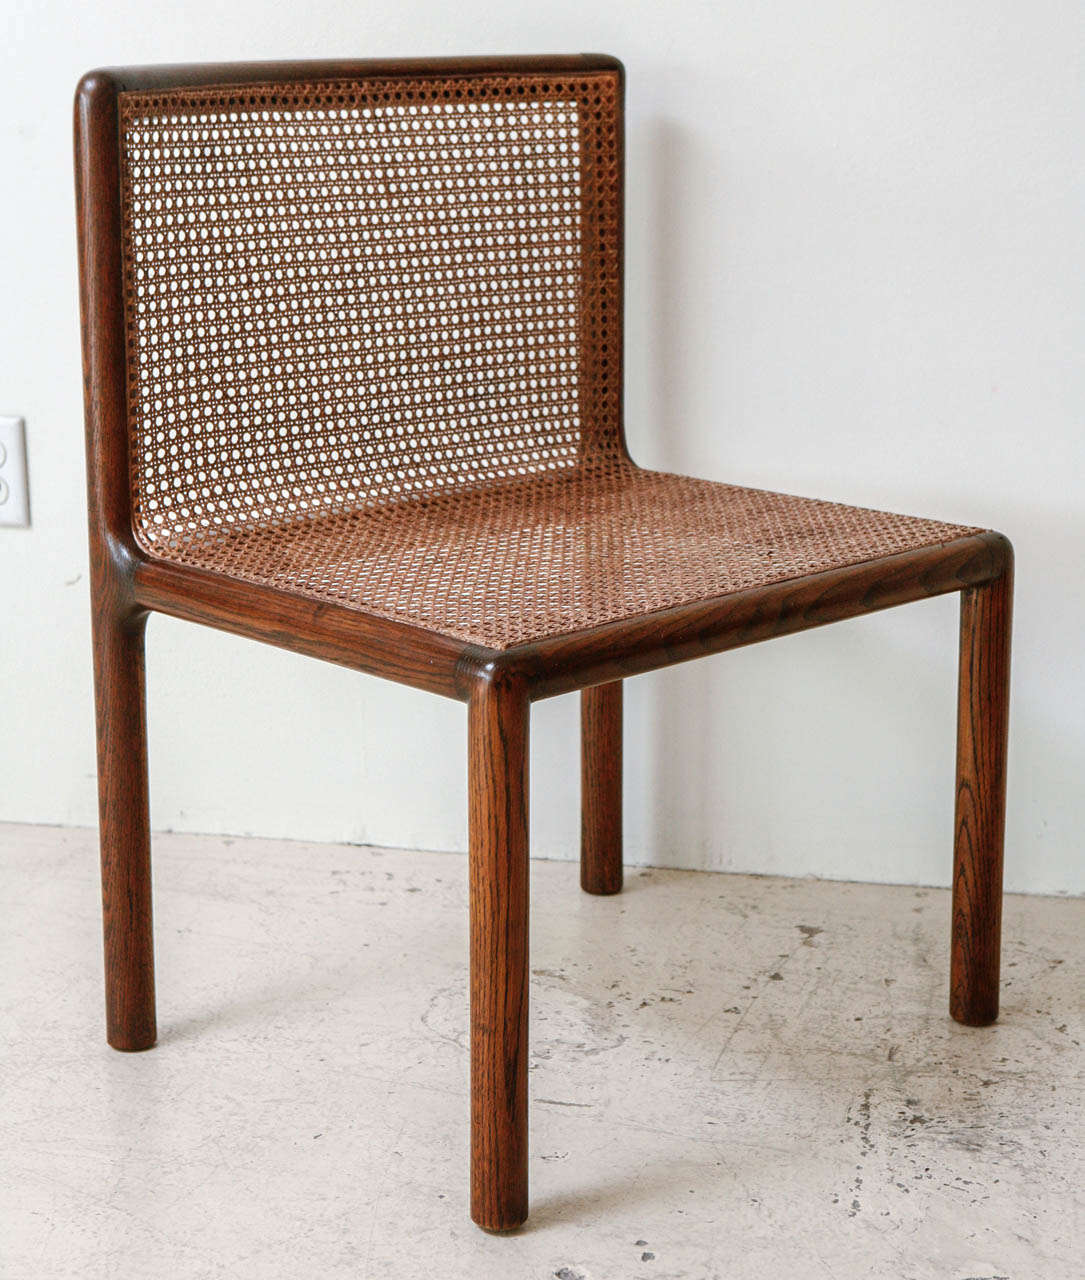 Oak Caned Chairs Designed by Noted Architect Phillip Enfield